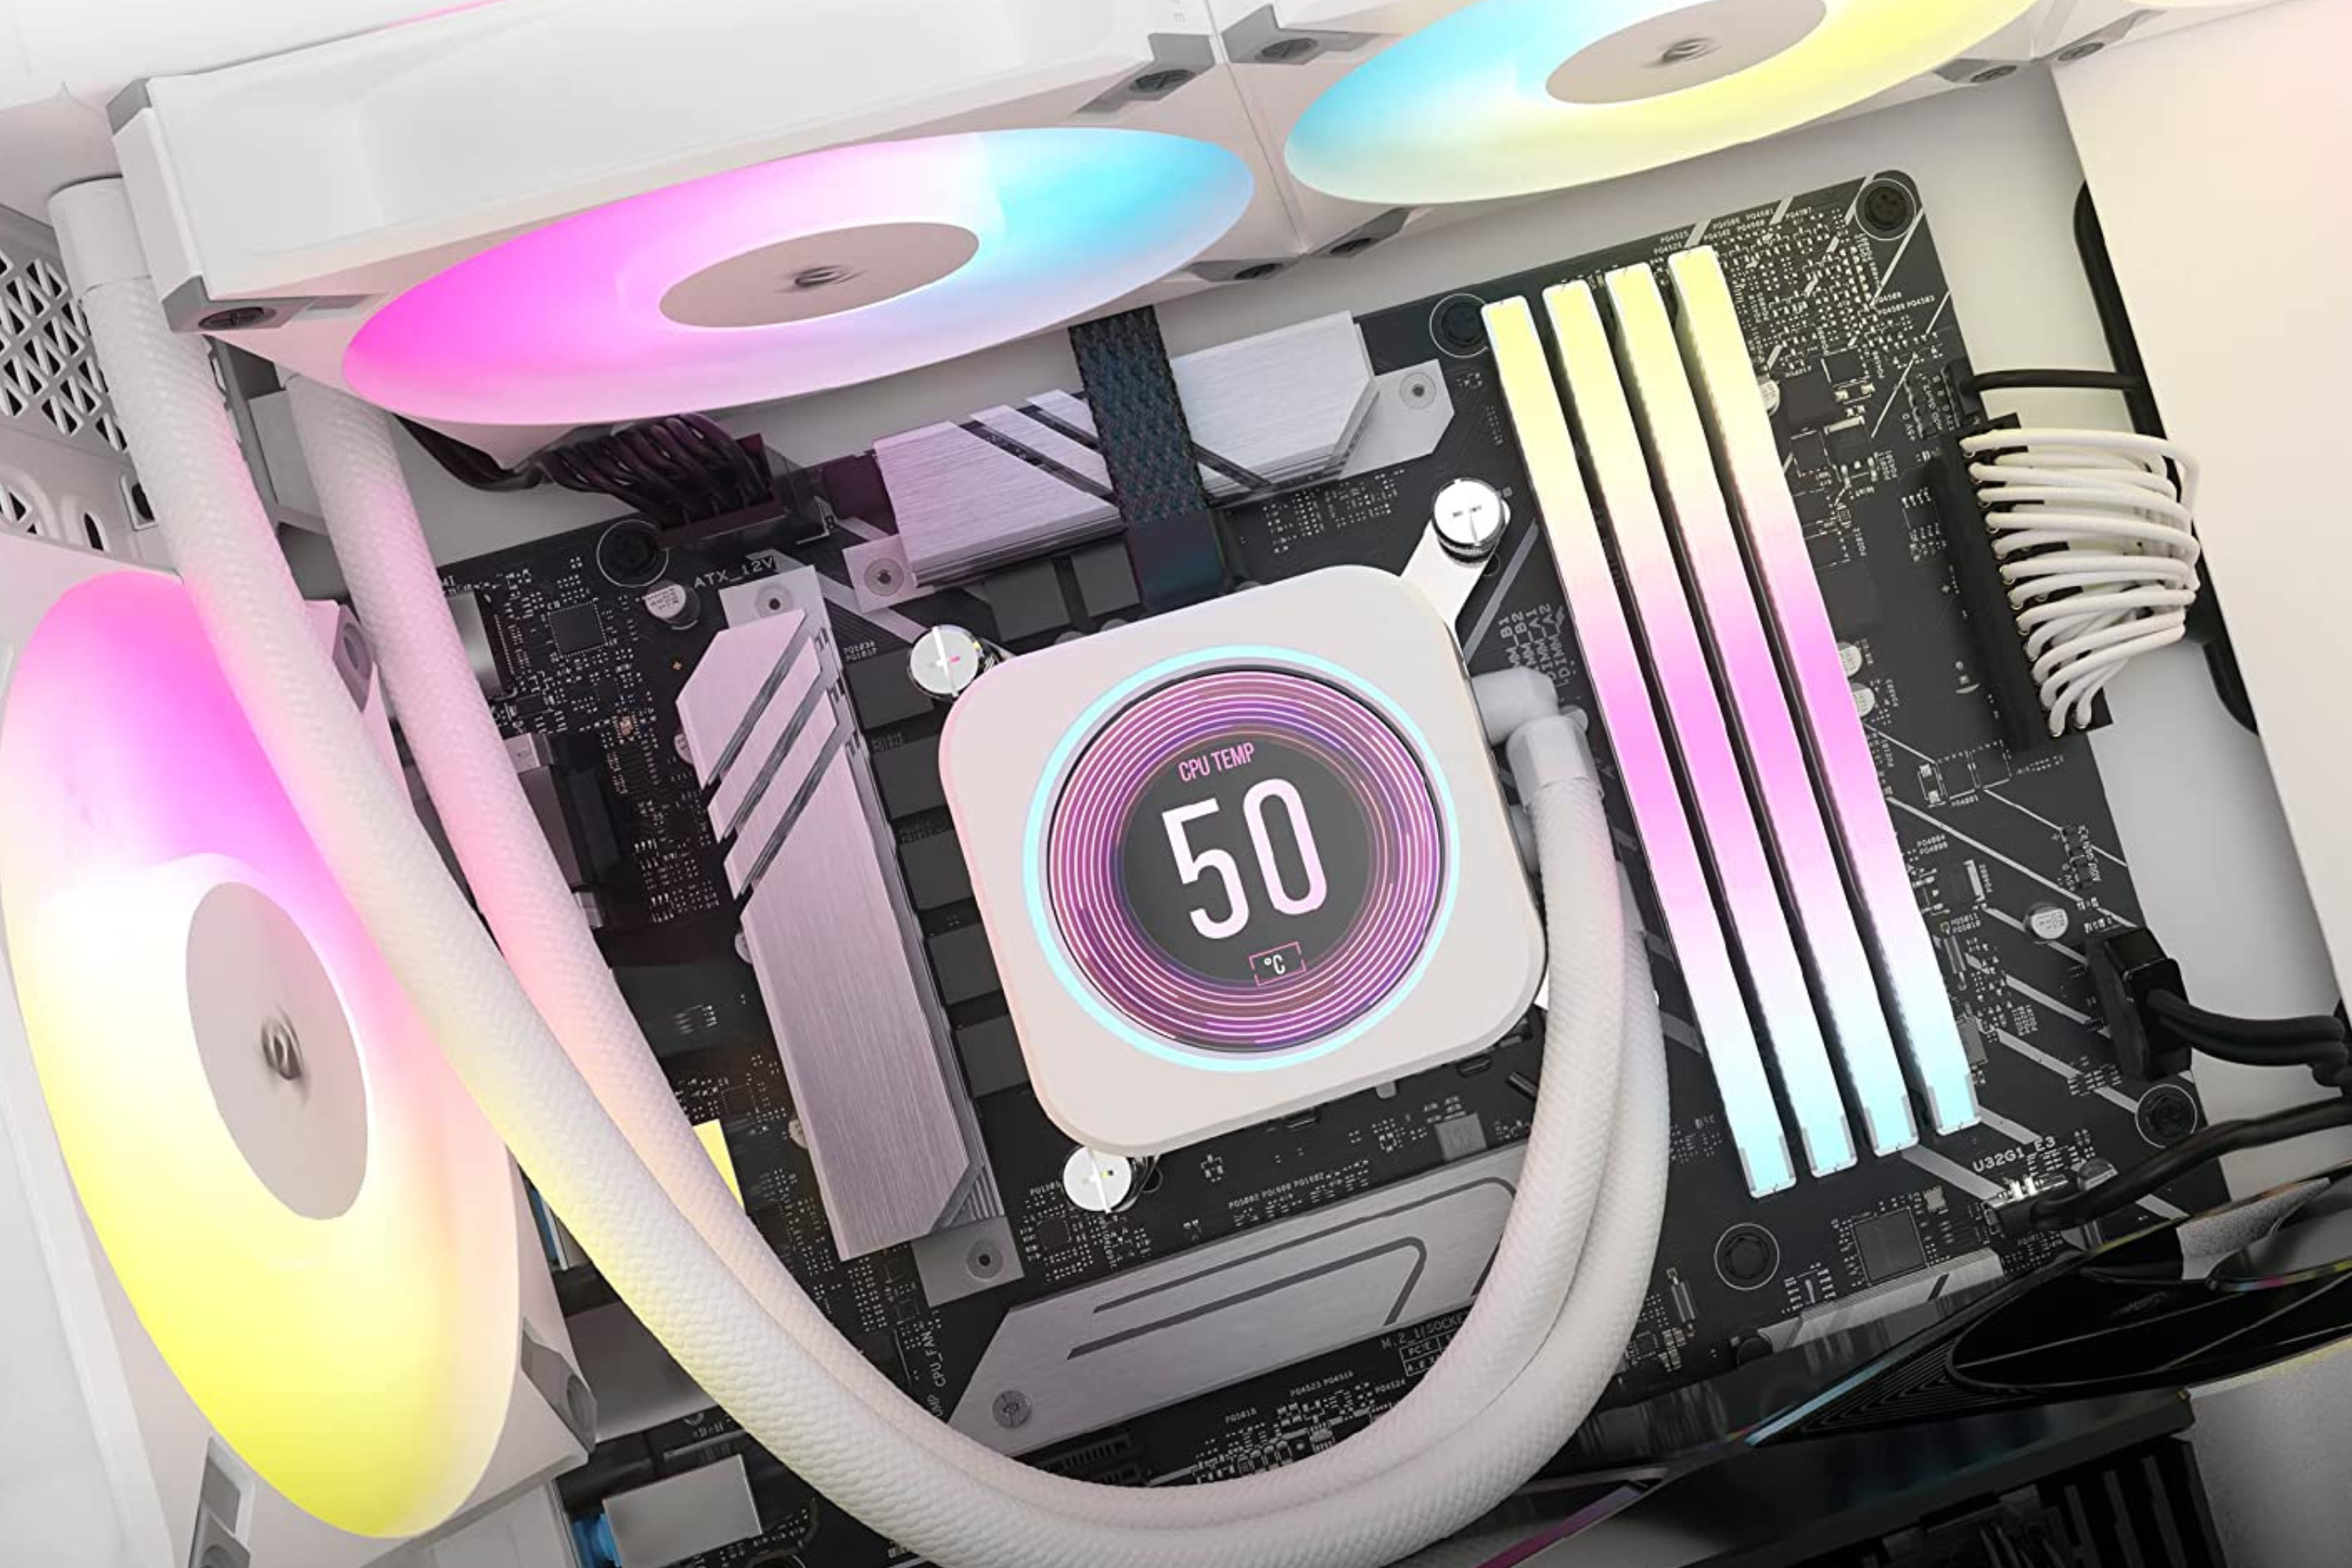 Corsair iCUE H150i Elite LCD XT Liquid CPU Cooler in a PC glowing with RGB lighting